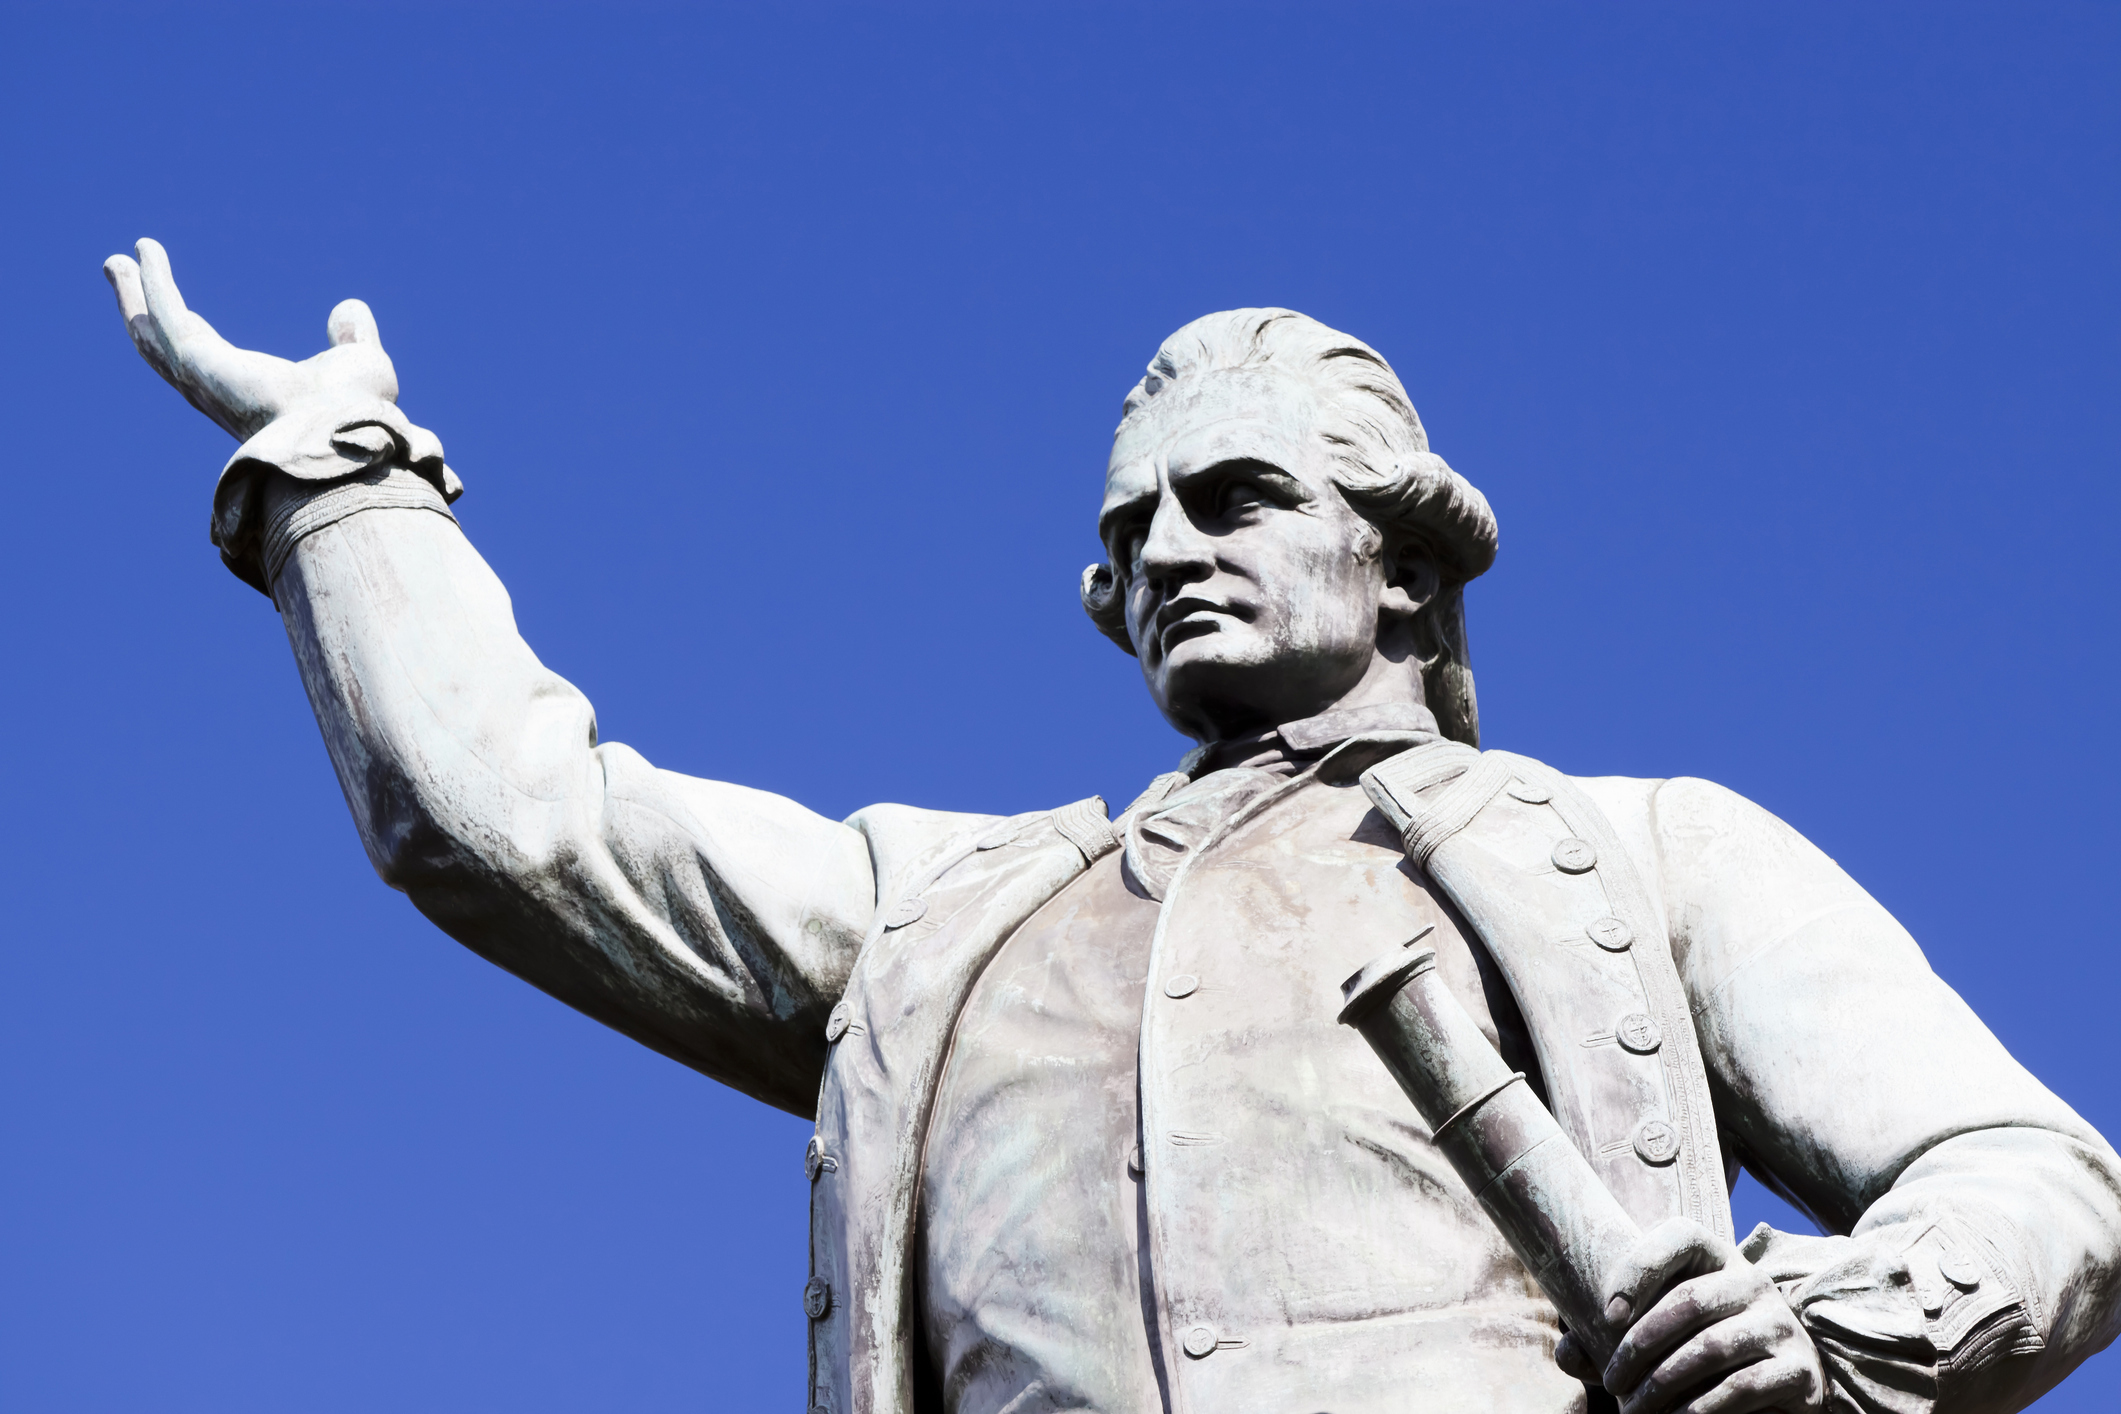 Captain Cook statue targeted by alleged vandals